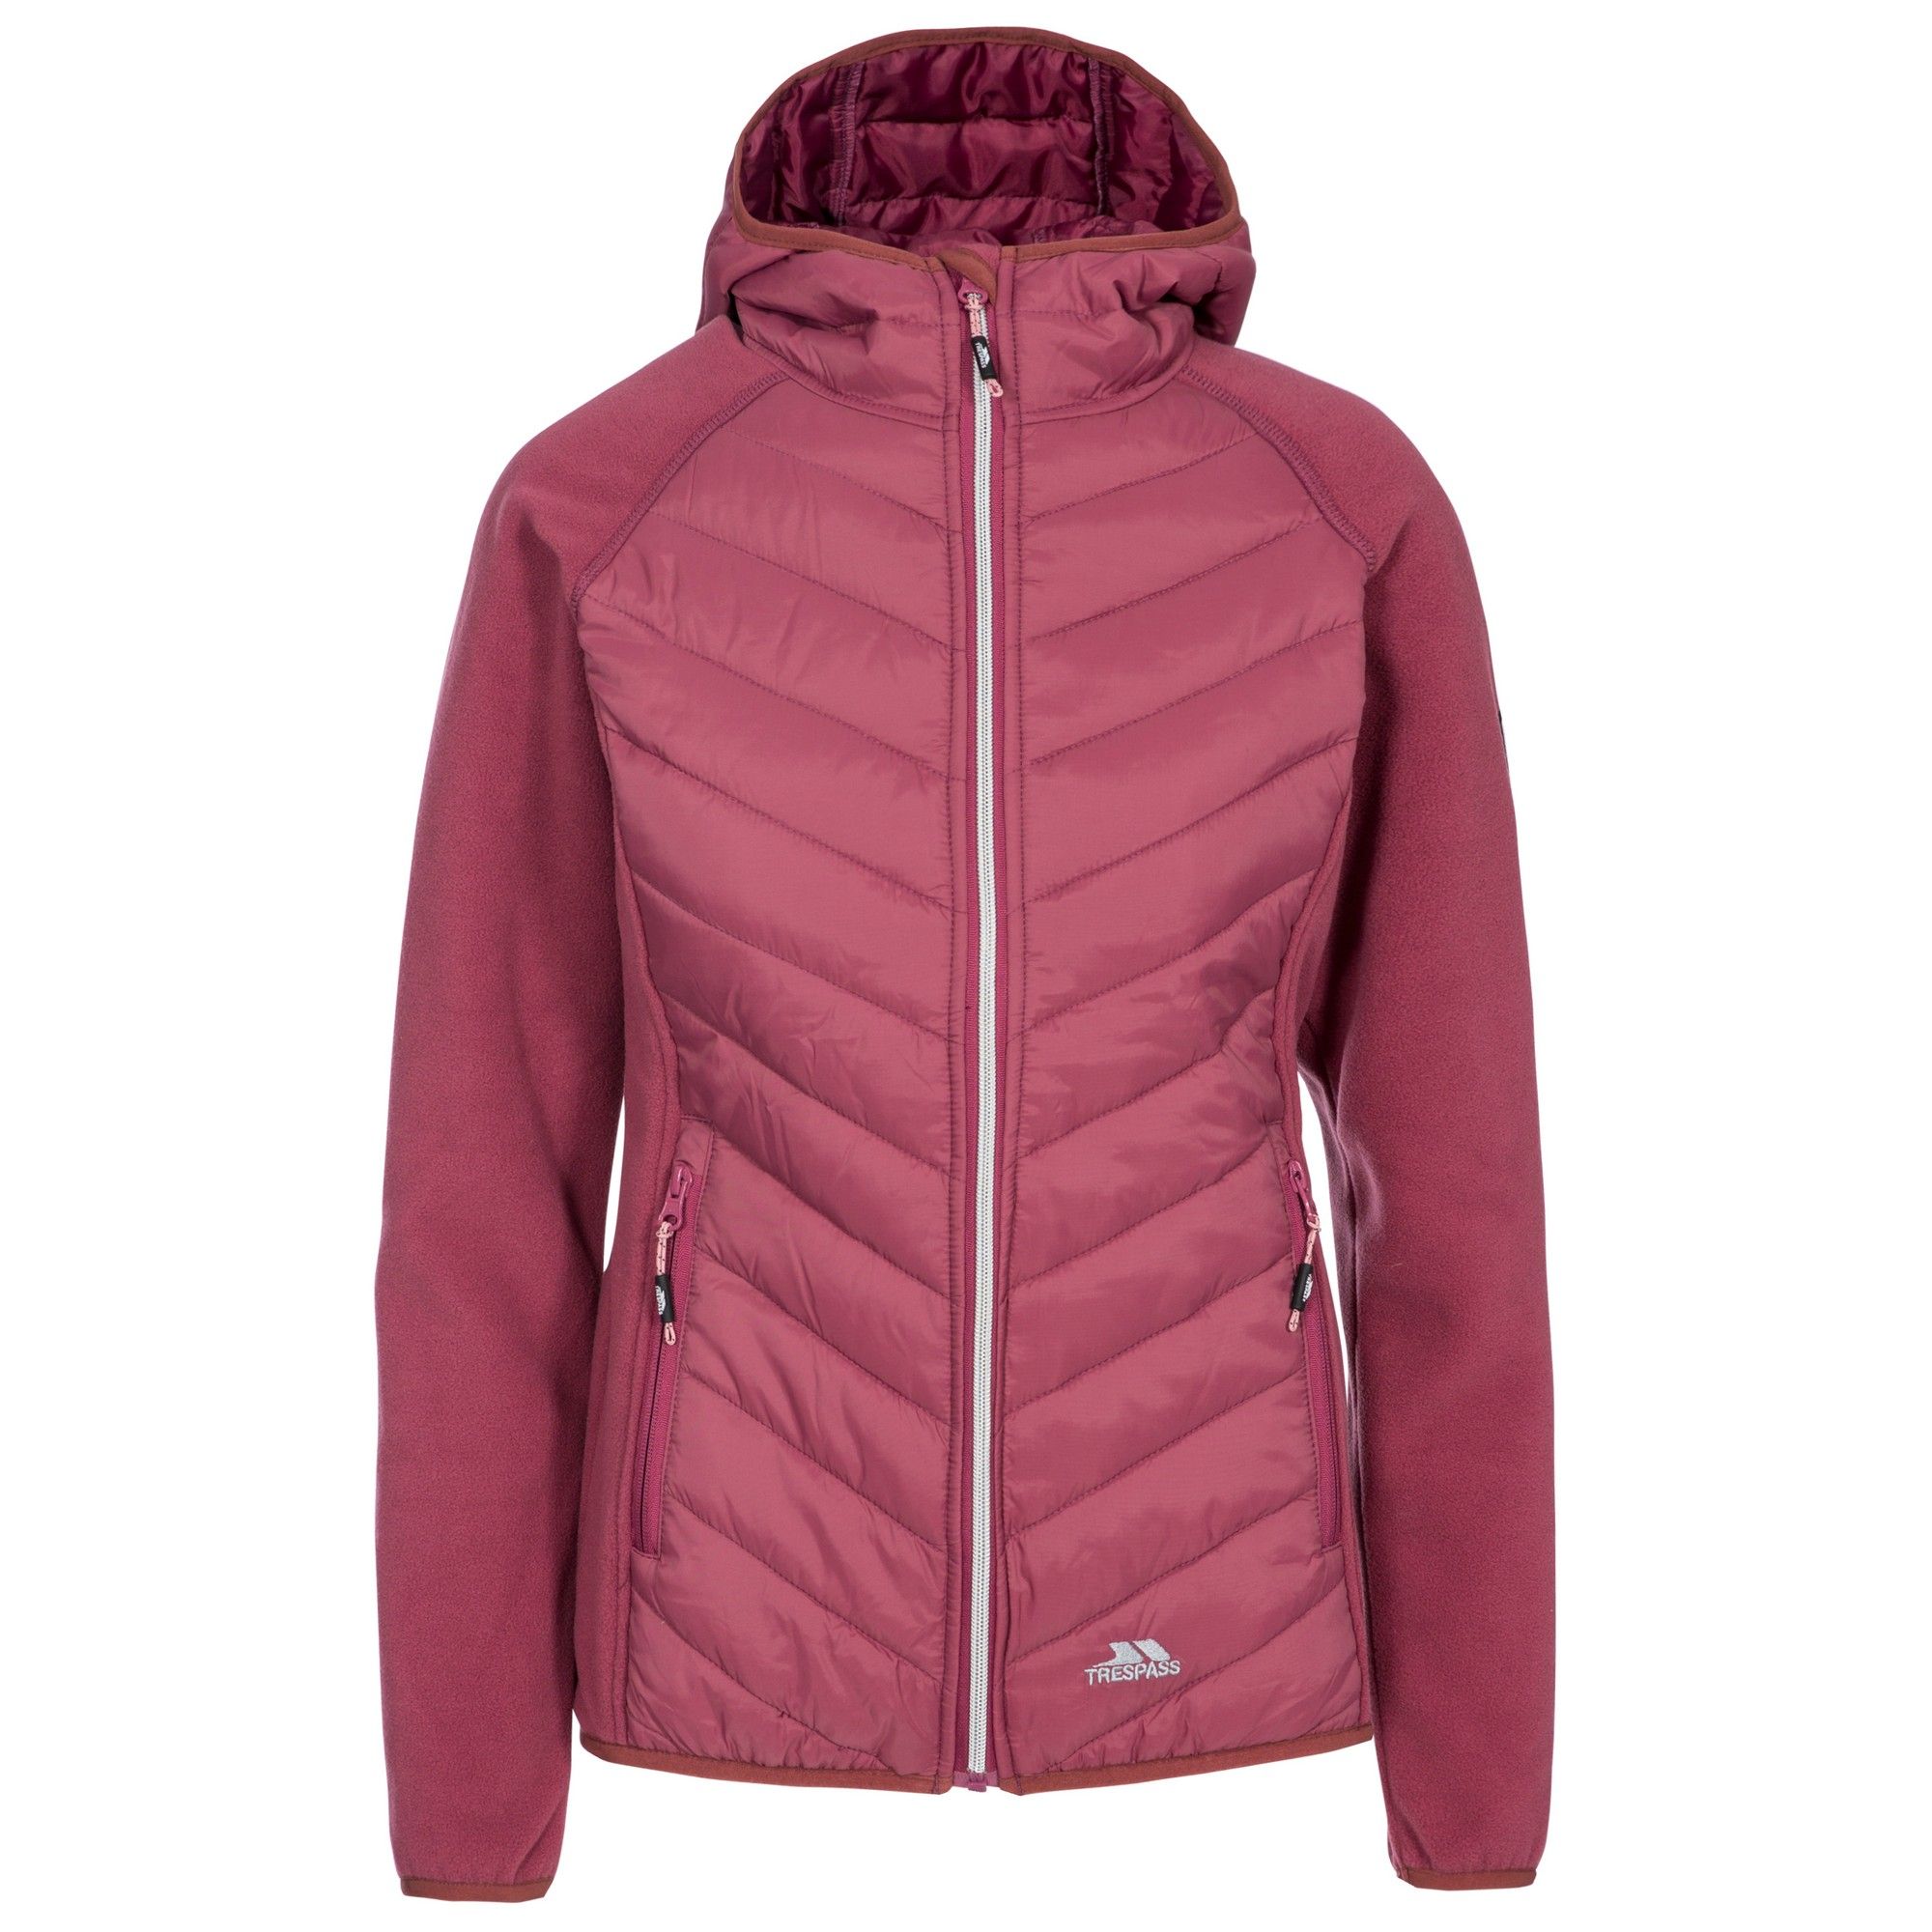 Fleece jacket. Soft touch padded panels. Grown on hood. Chin guard. 2 low profile zip pockets. Stretch binding at edges. 100% Polyester/100% Polyamide. Trespass Womens Chest Sizing (approx): XS/8 - 32in/81cm, S/10 - 34in/86cm, M/12 - 36in/91.4cm, L/14 - 38in/96.5cm, XL/16 - 40in/101.5cm, XXL/18 - 42in/106.5cm.